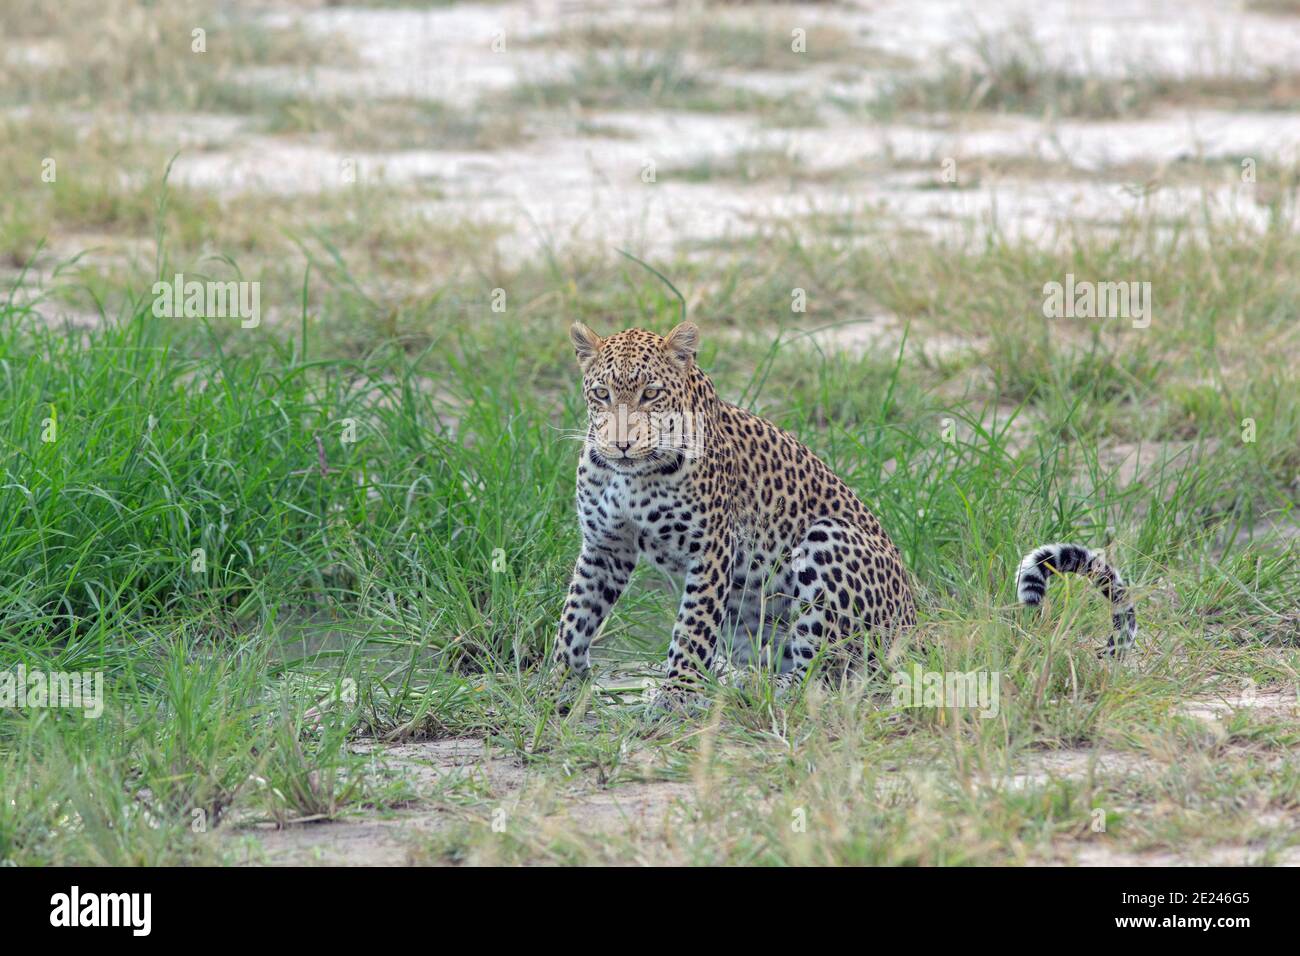 Leopard (Panthera pardus). About to leave after drinking  from a water hole. Conspicuous against wet season verdant green grass. Botswana. Africa. Stock Photo